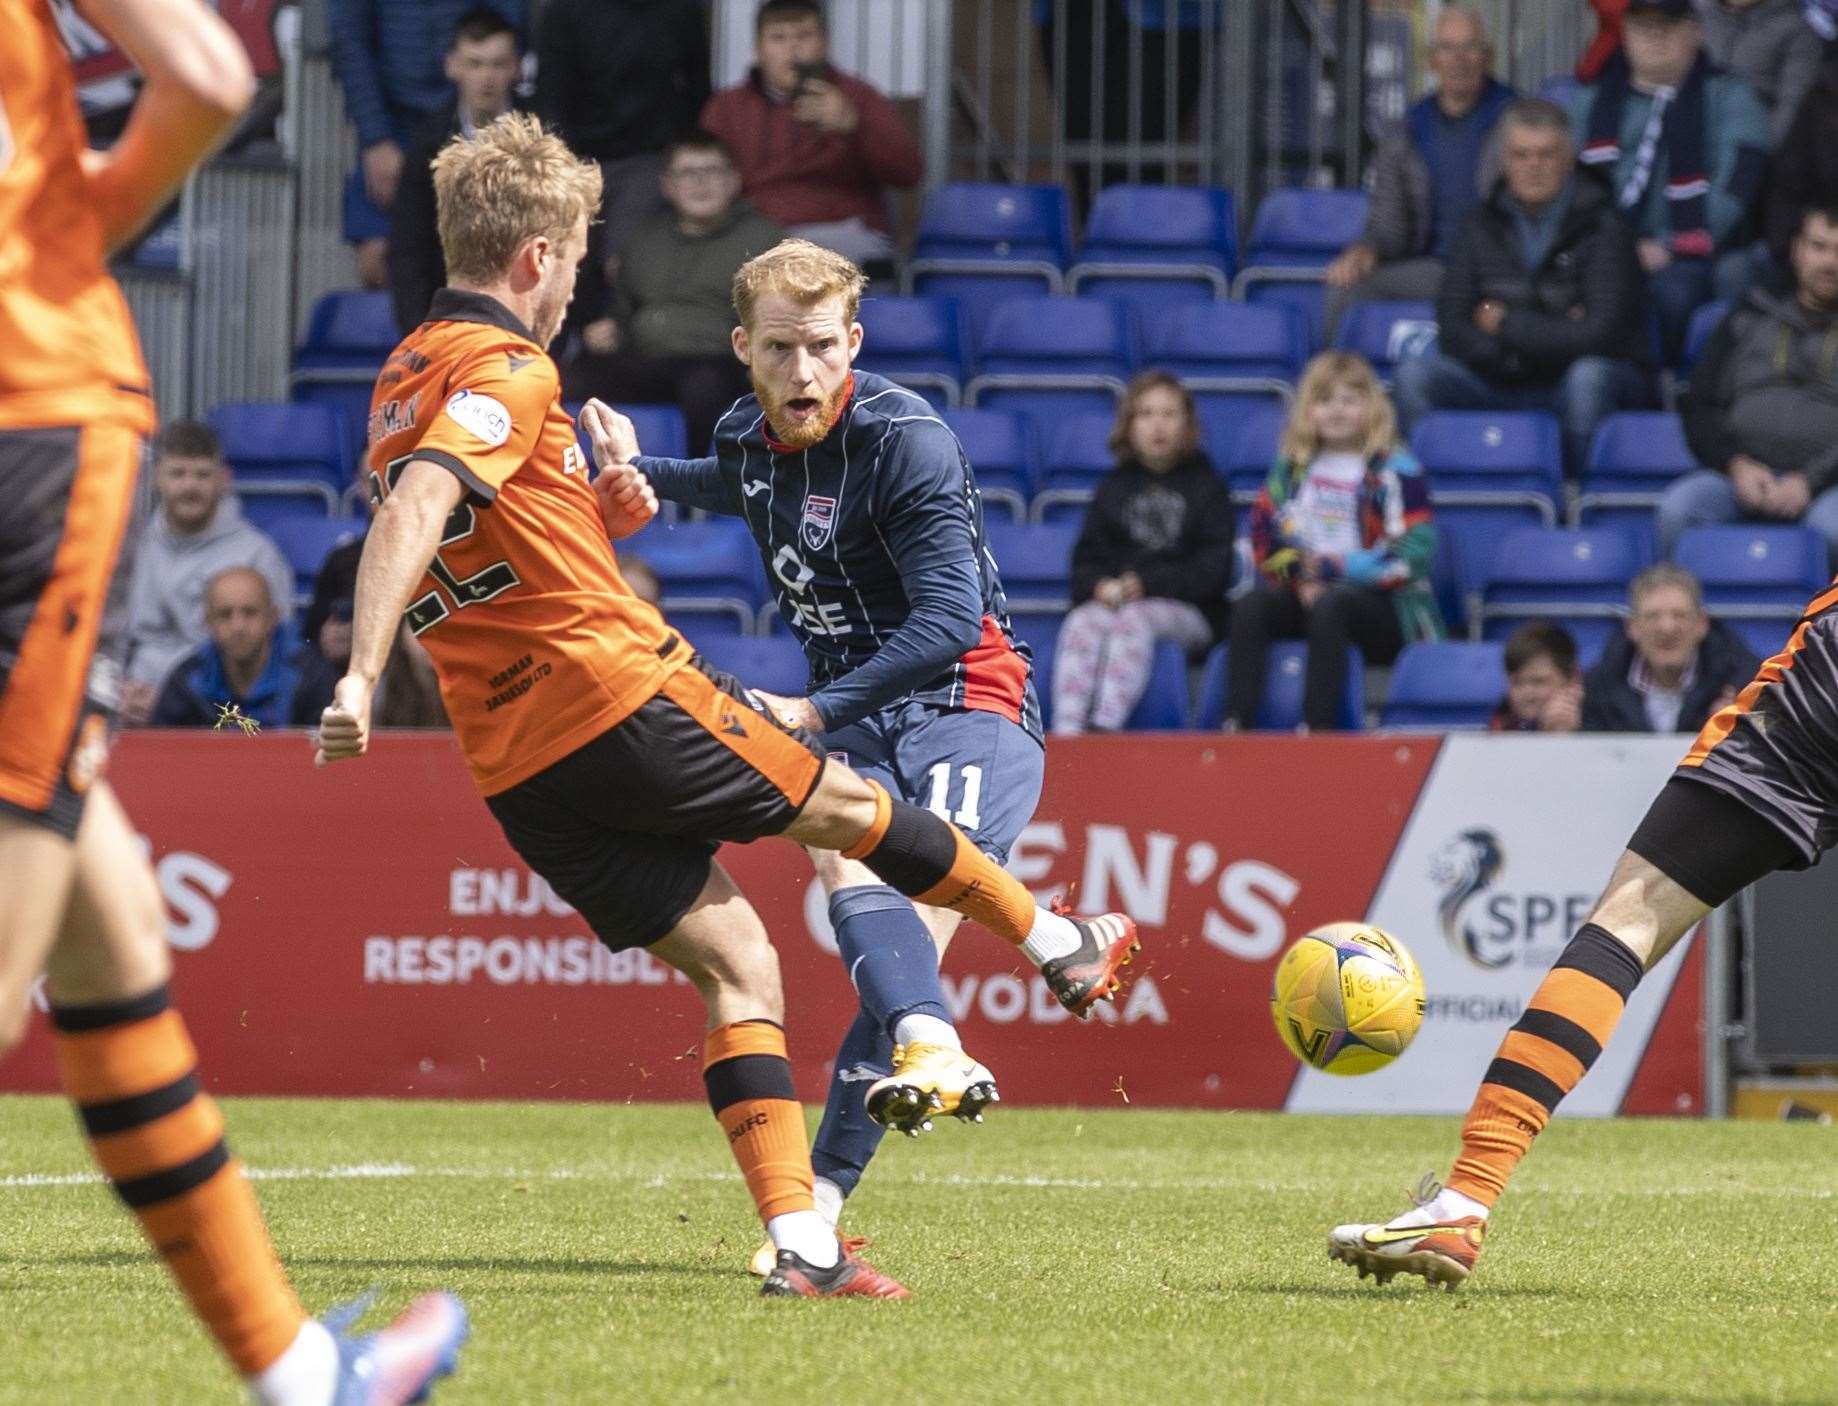 Picture - Ken Macpherson. Ross County(1) v Dundee Utd(2). 14/05/22. Ross County's Josh Sims gets a shot on goal.